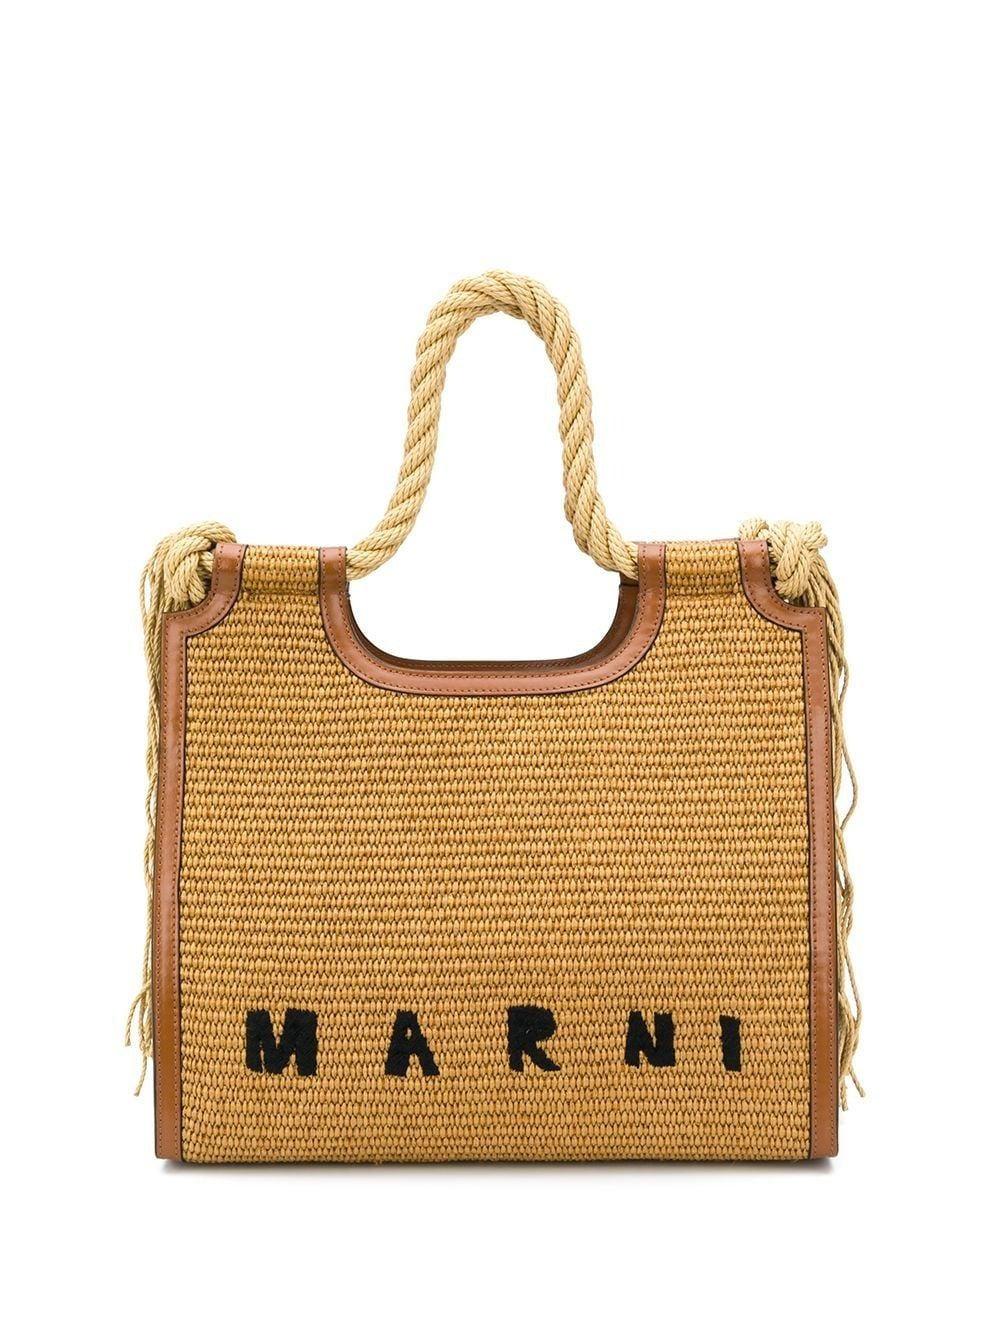 Awake Clemence Woven Large Tote Beige